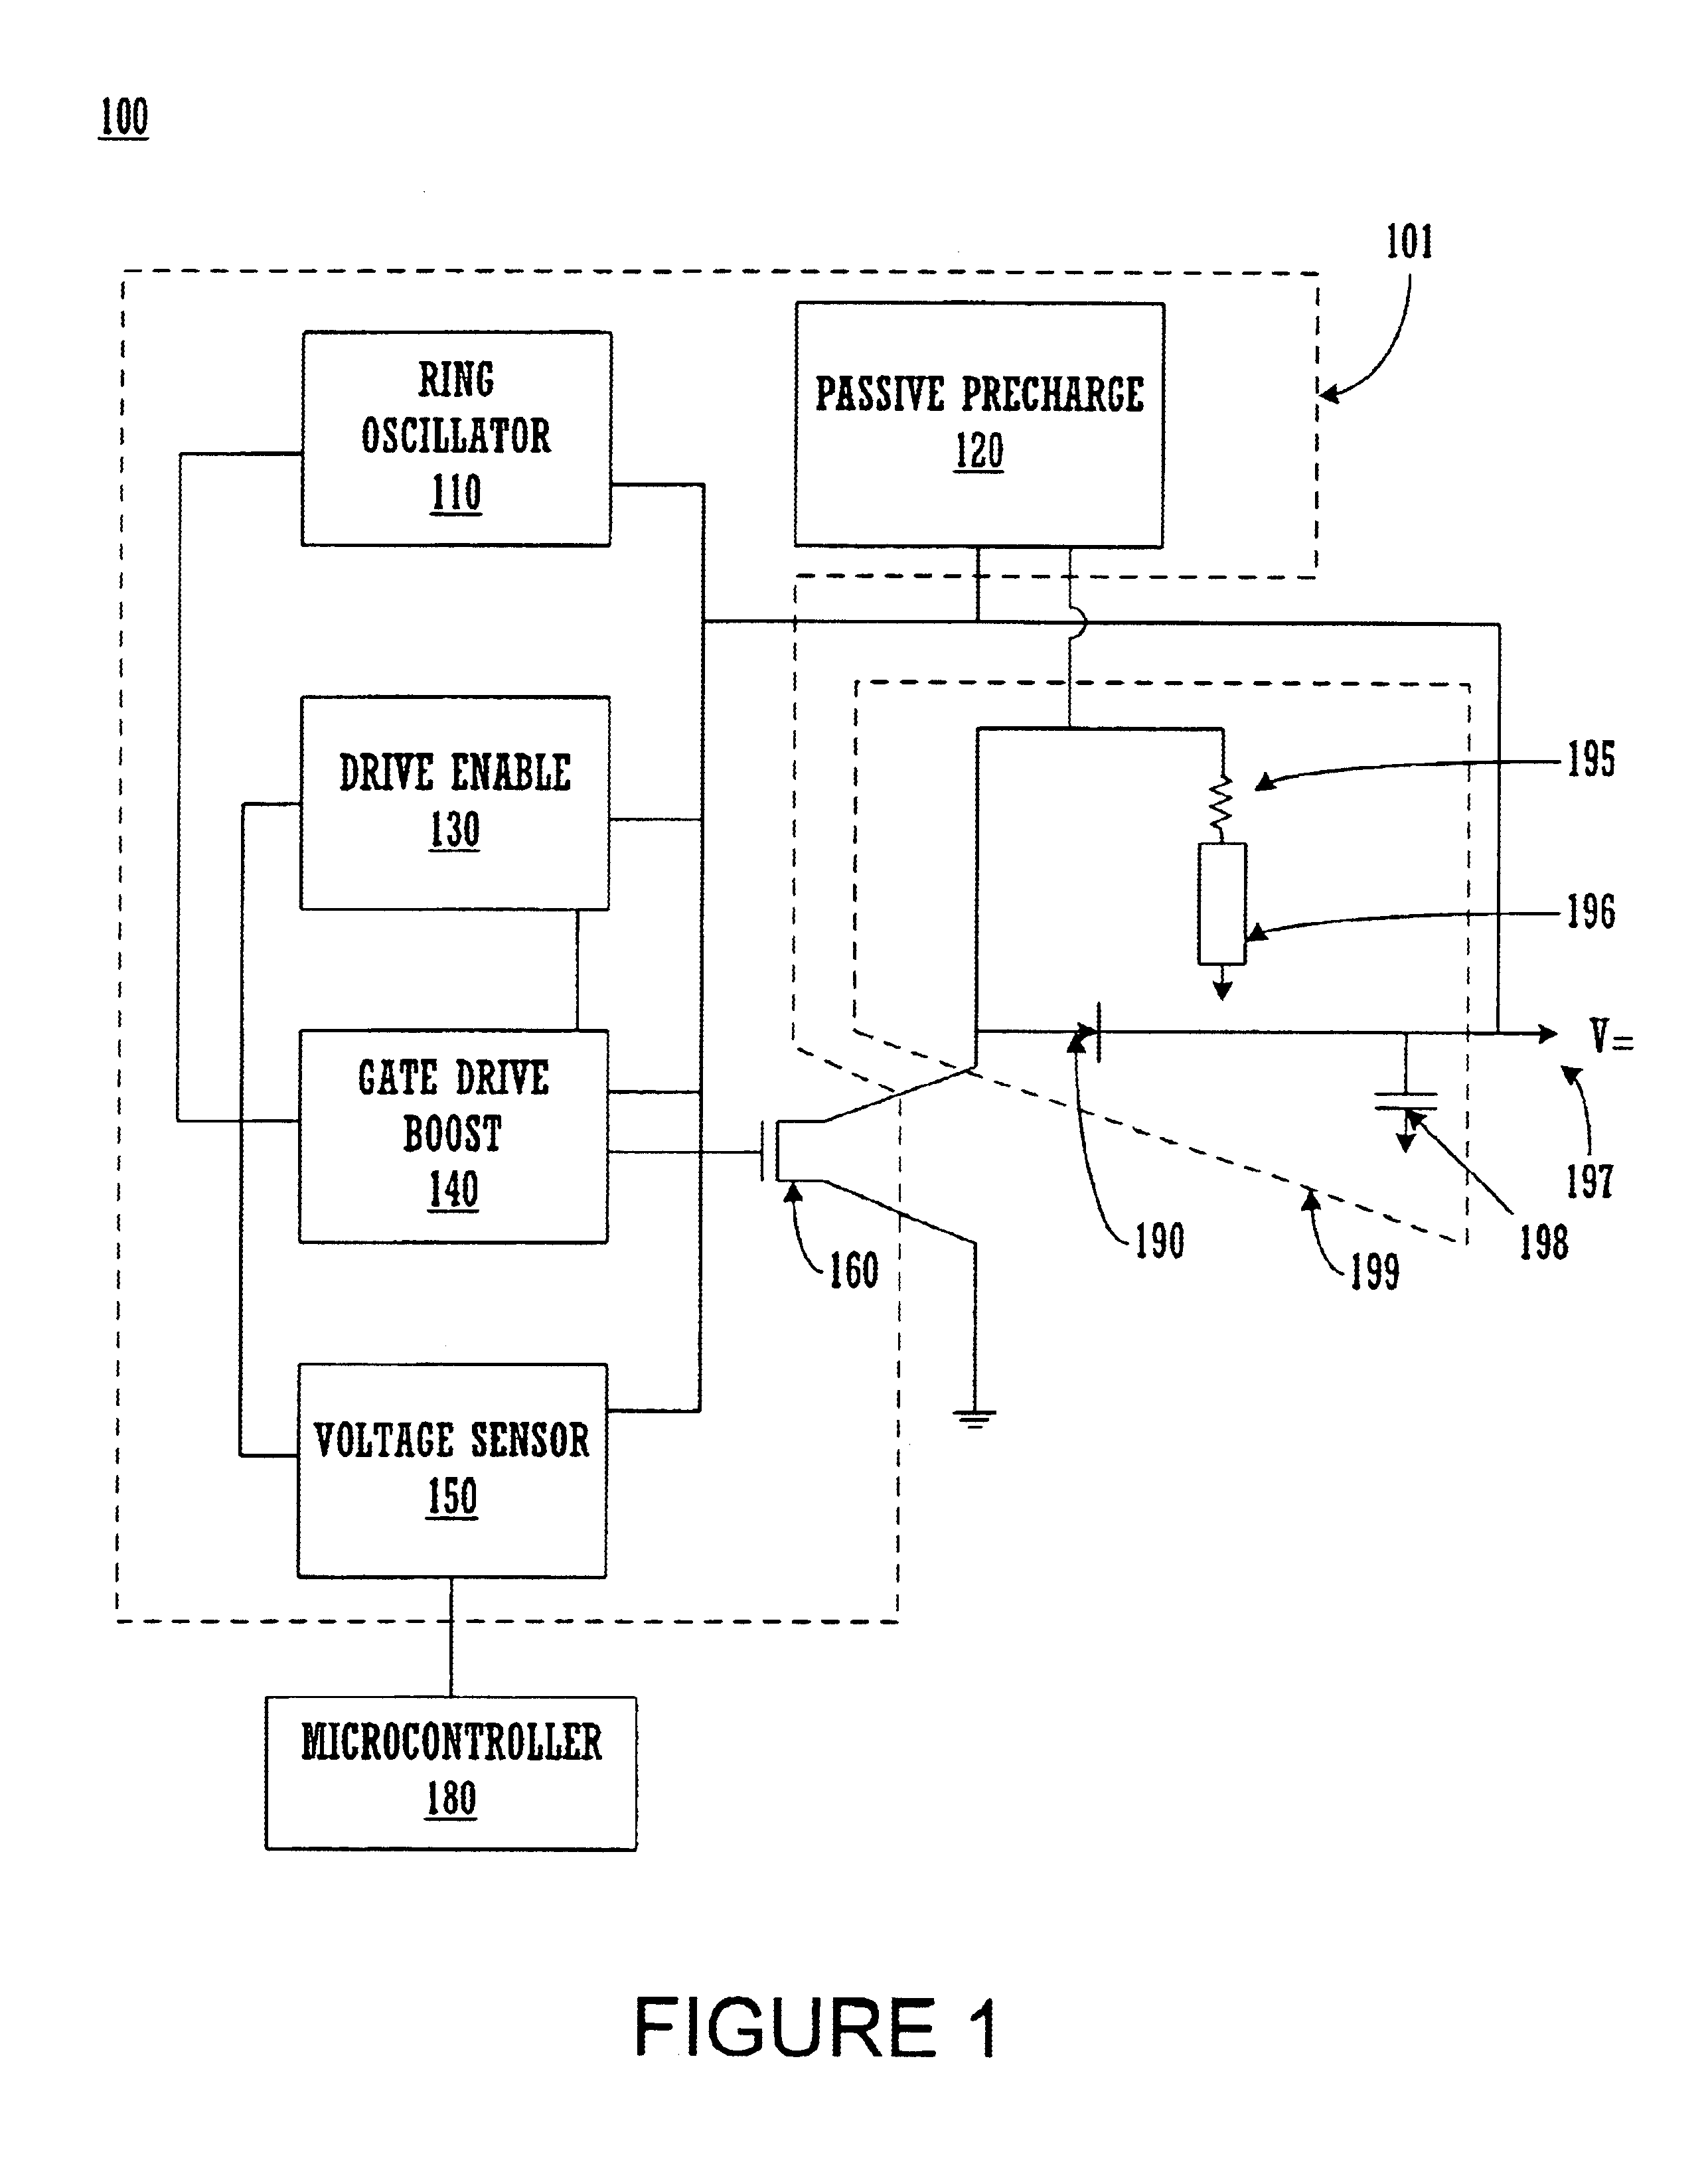 Method for efficient supply of power to a microcontroller